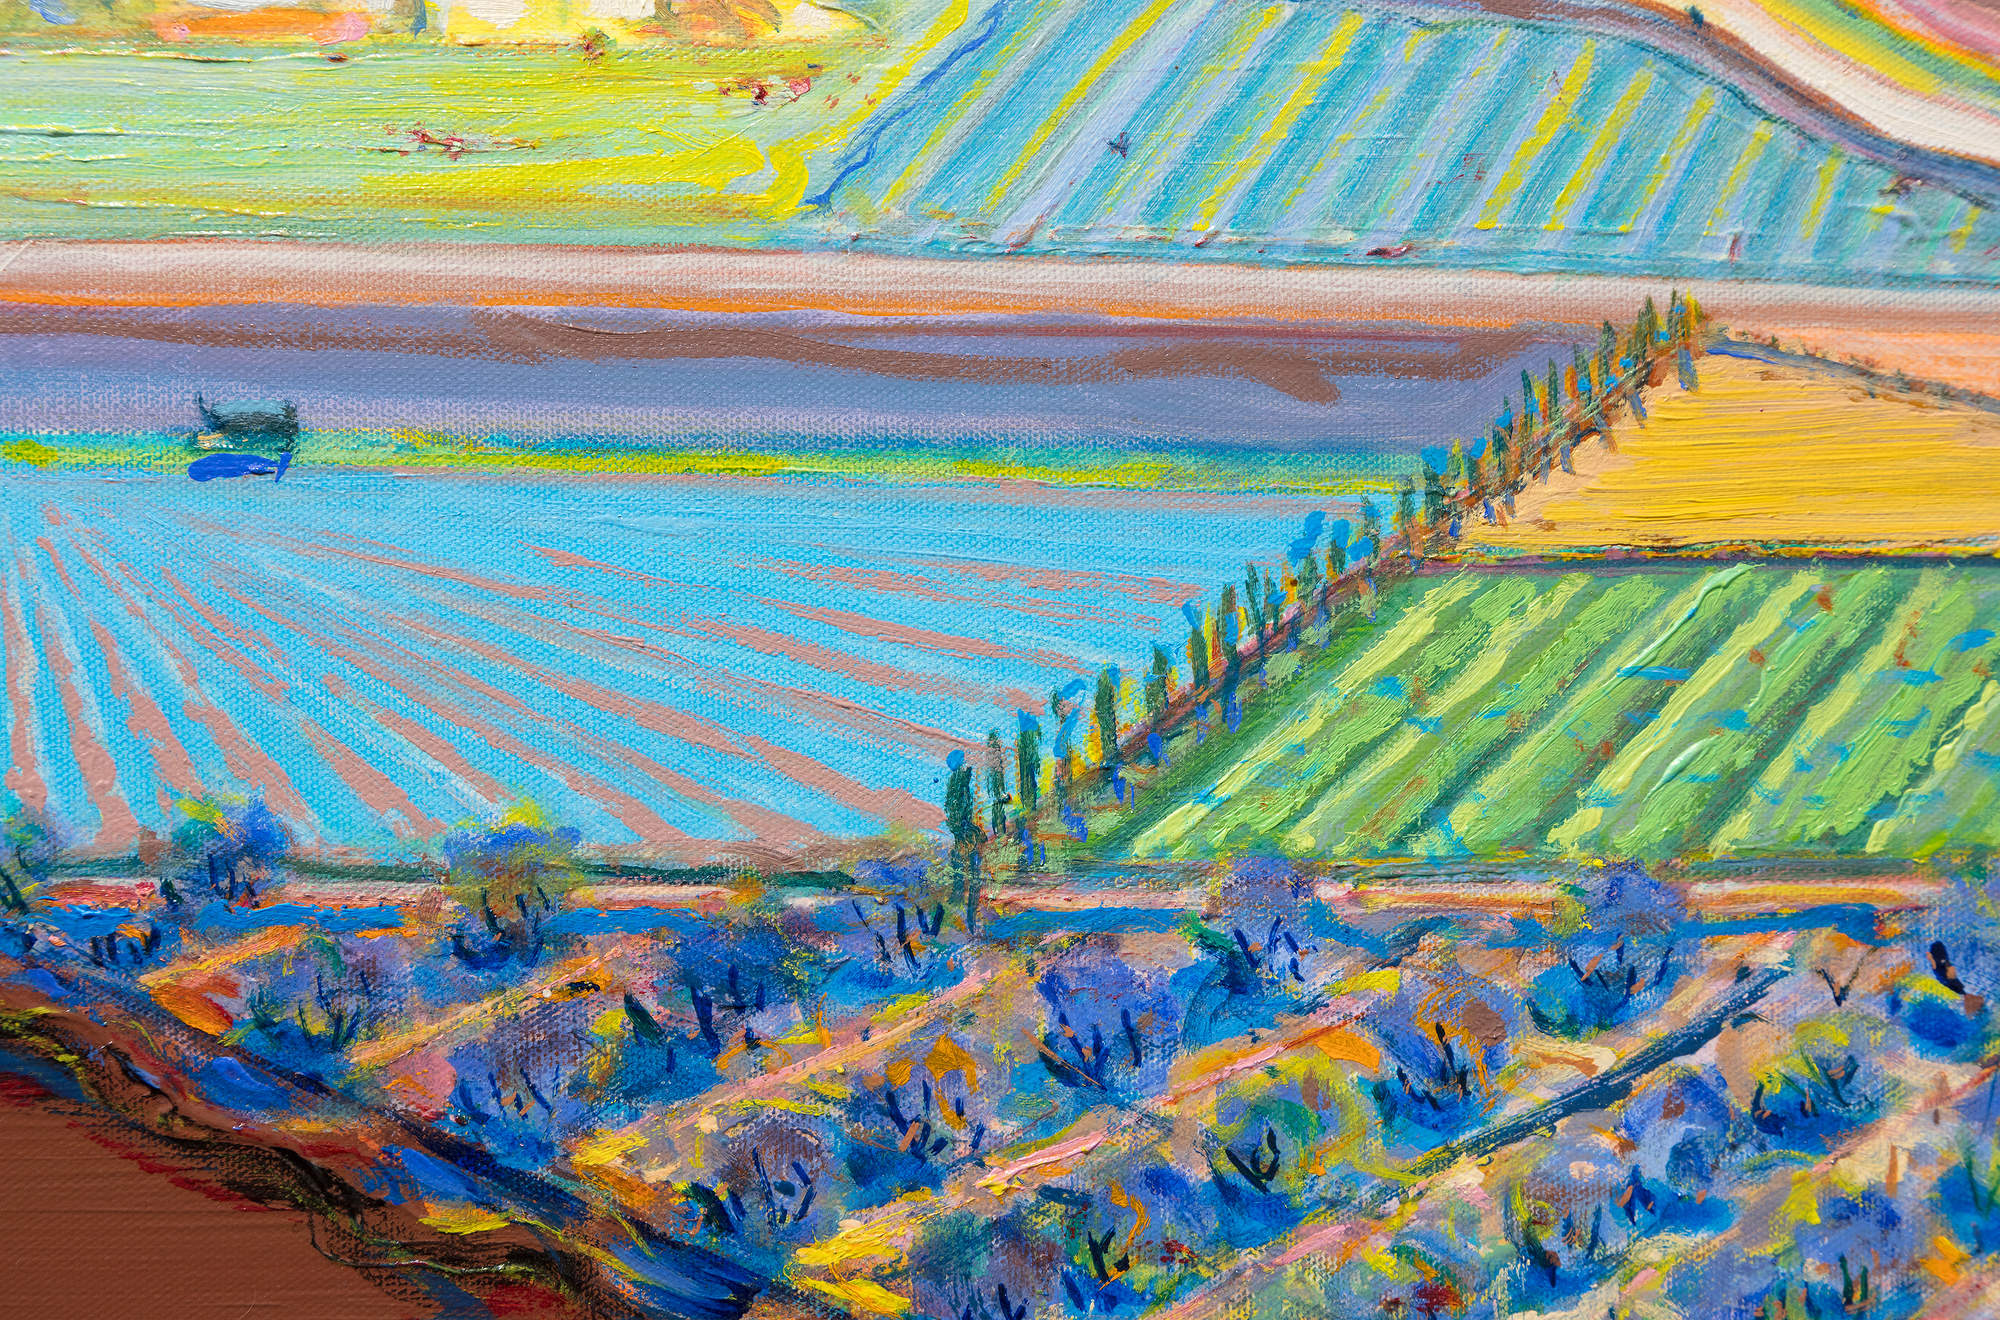 WAYNE THIEBAUD - The Riverhouse - huile sur toile - 18 x 35 3/4 in.